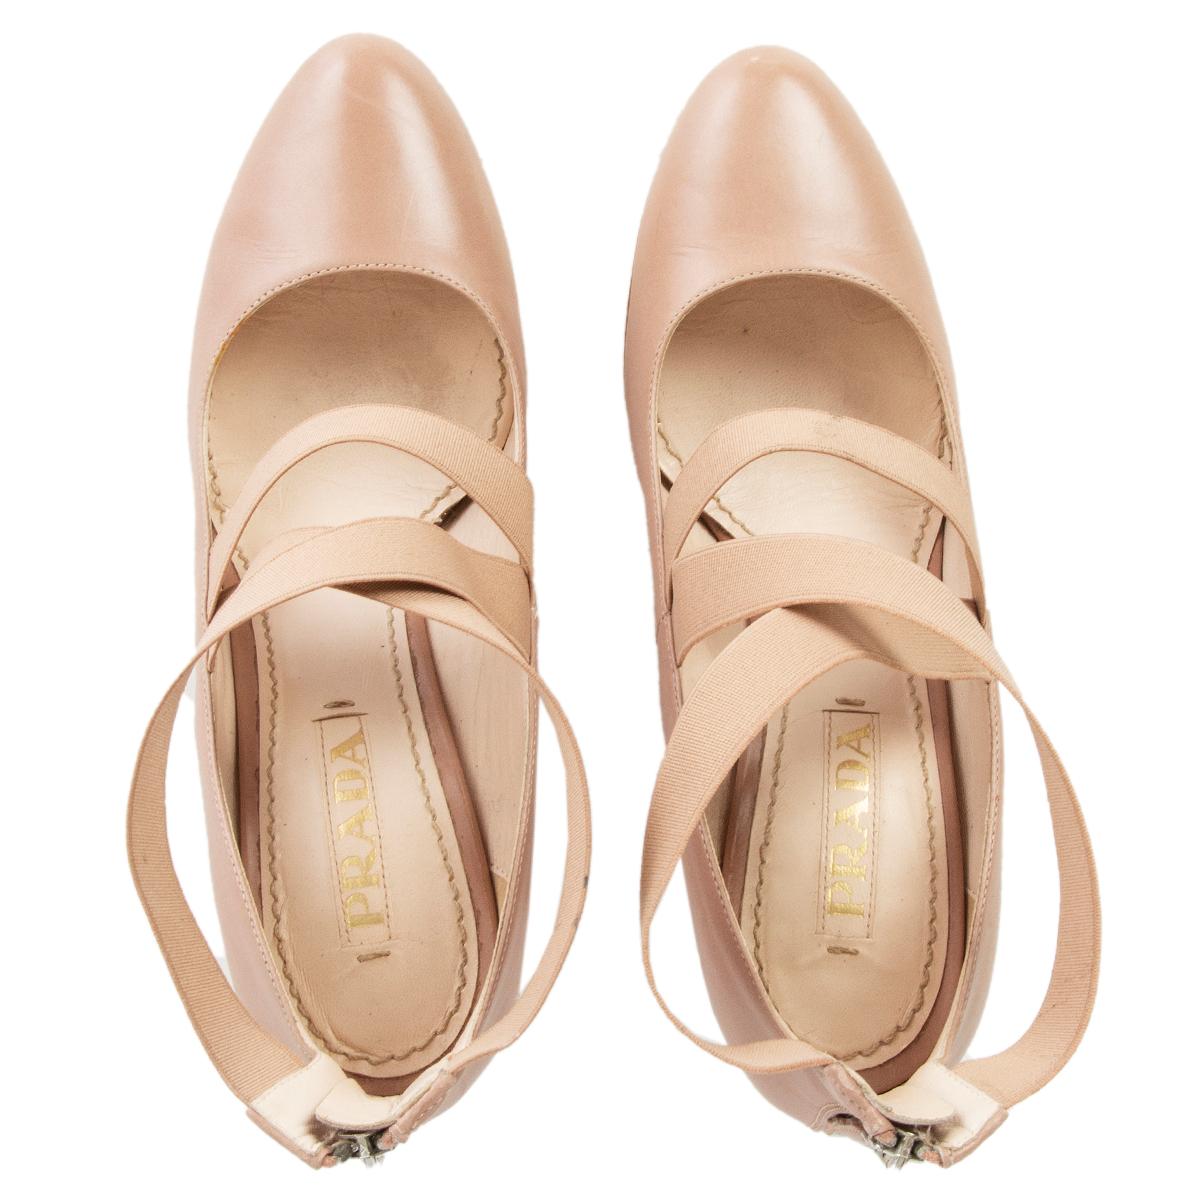 Women's PRADA nude leather BALLET STYLE Pumps Shoes 37.5 For Sale